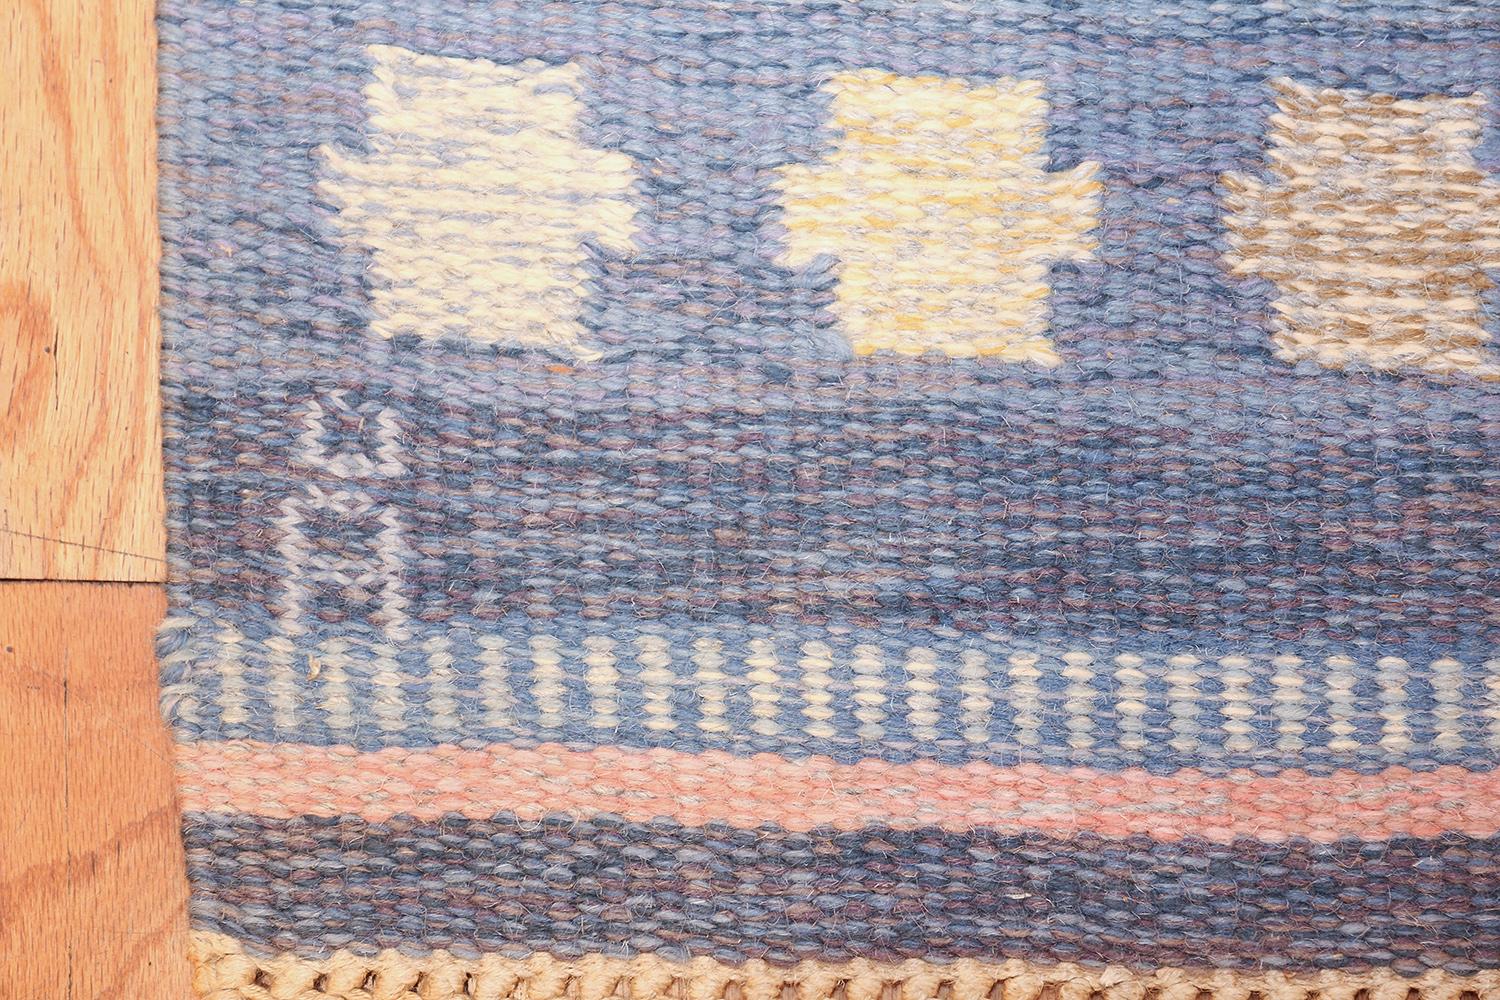 Mid-Century Modern Vintage Swedish Kilim by Anna-Joanna Angstrom. Size: 5 ft 6 in x 7 ft 9 in